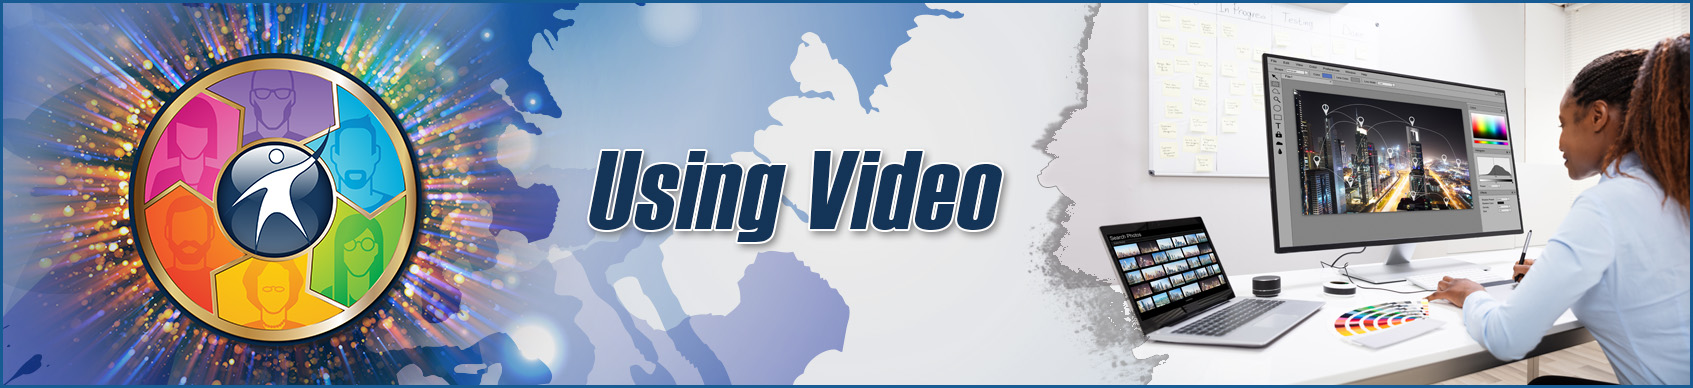 Using video banner - Graphic composite with OTAN logo and woman using video editing software